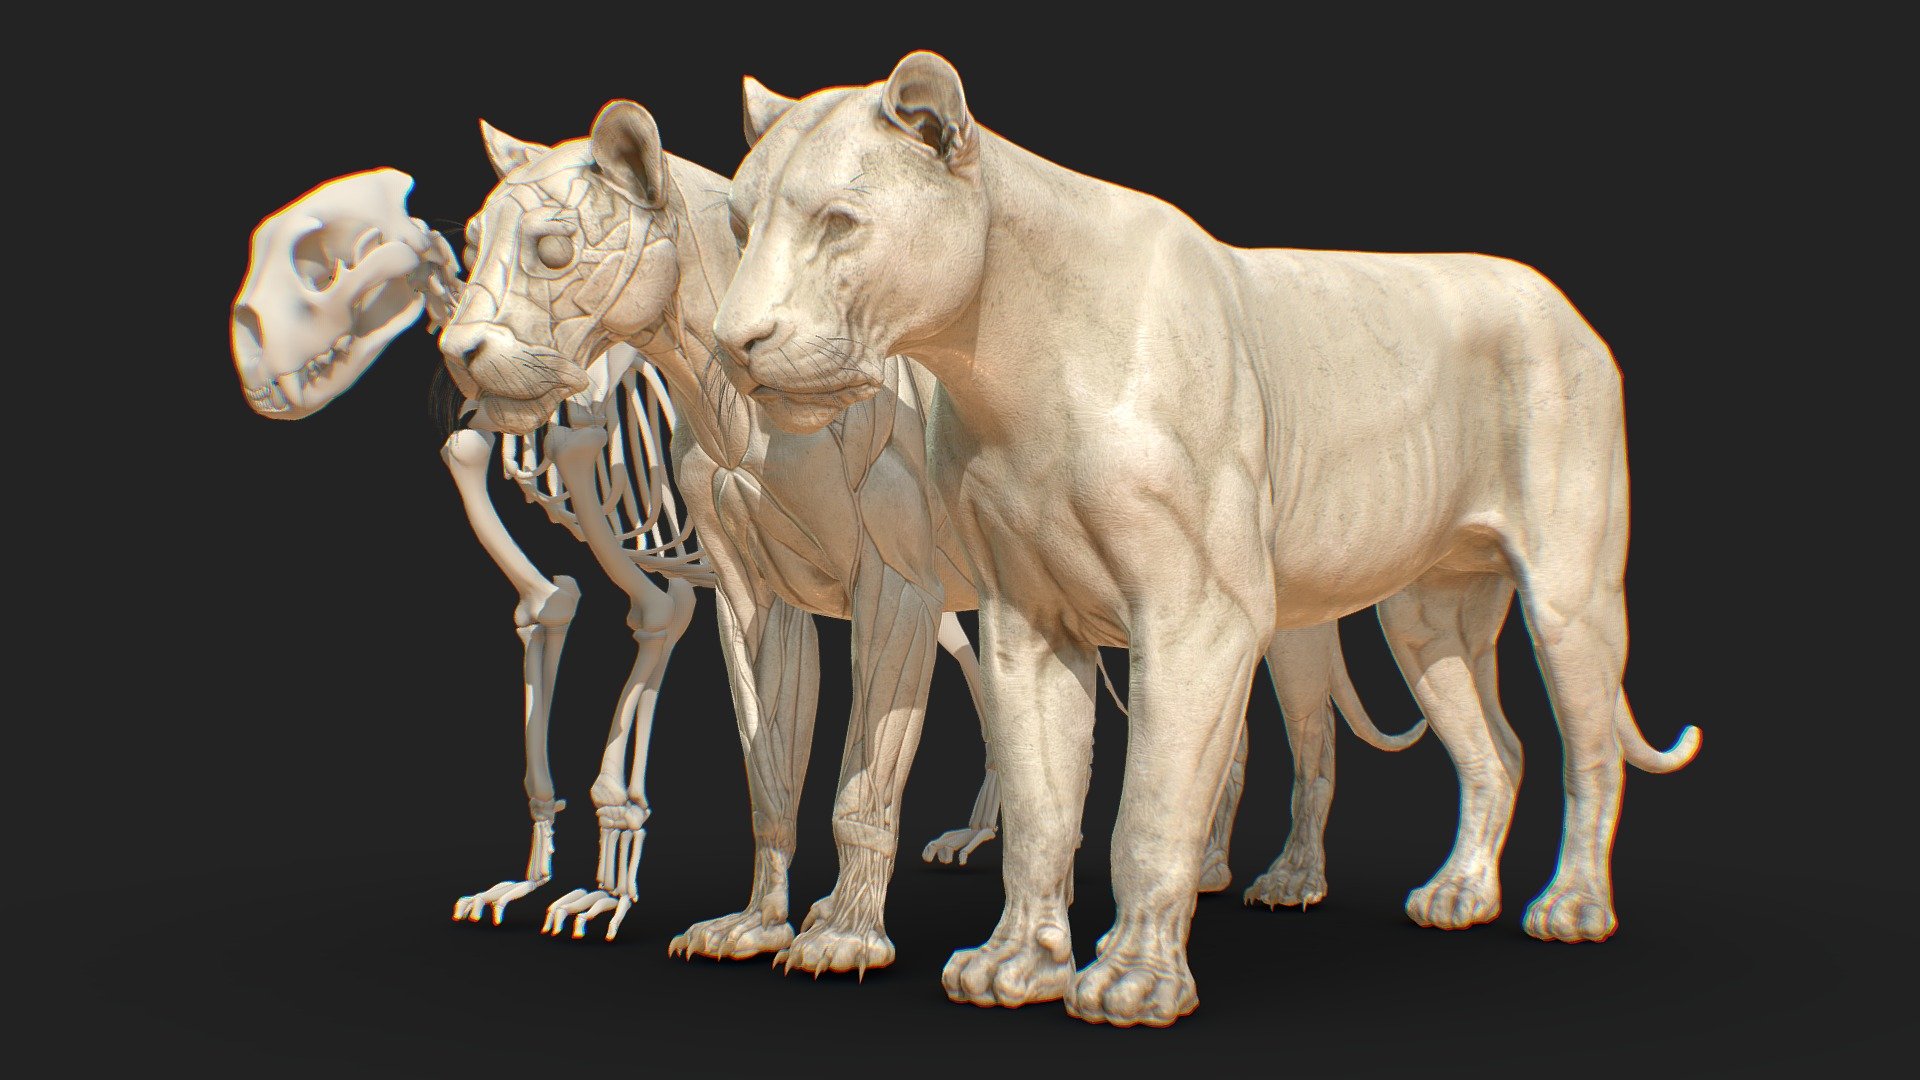 ANIMAL - LION ANATOMY SKIN ECORCHE (Included High Poly)

General:


This Bundle included 1 lion skin and 1 lion acorche with eyes
This model was created for easy study animal lion anatomy
Good Topology
Baked map and textures in 4096x4096 resolutions.

Included High Poly



Scene Unit: cm


Height: 108 cm
Length: 203 cm

Files Included:

Scenes.rar


LionAnatomy.fbx
LionAnatomy.ma
LionAnatomy.max
LionAnatomy.obj
LionAnatomy.mtl
LionAnatomy.blend
LionAnatomy.ztl
LionAnatomyEcorche.stl
LionAnatomySkin.stl

Textures.rar


lion_ecorche_BaseColor.png
lion_ecorche_curvature.png
lion_ecorche_normal_base.png
lion_ecorche_position.png
lion_ecorche_thickness.png

lion_ecorche_world_space_normals.png



lion_skin_BaseColor.png


lion_skin_curvature.png
lion_skin_normal_base.png
lion_skin_position.png
lion_skin_thickness.png
lion_skin_world_space_normals.png
 - Animal Lion Anatomy Skin Ecorche - 3D model by cuteocg 3d model